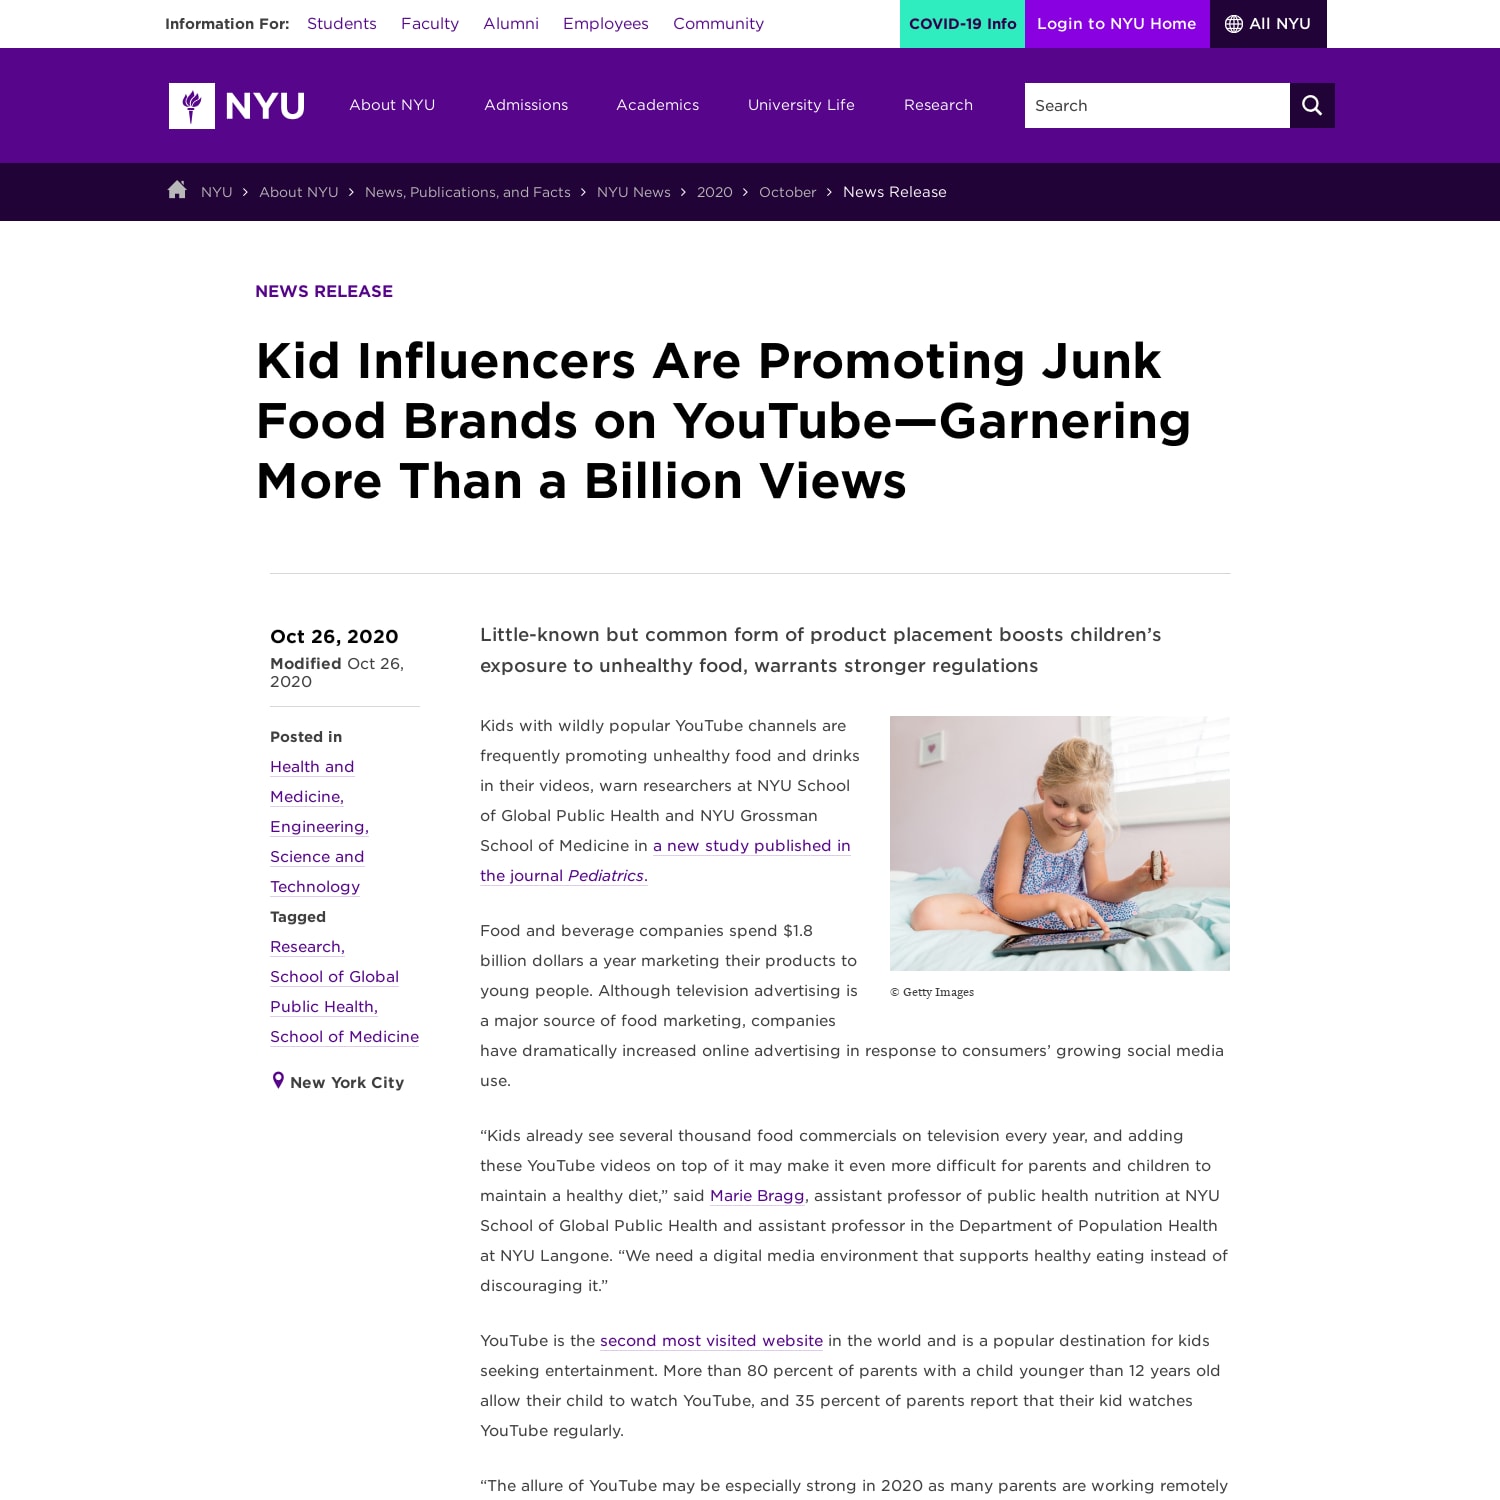 Kid Influencers Are Promoting Junk Food Brands on YouTube—Garnering More Than a Billion Views: Little-known but common form of product placement boosts children’s exposure to unhealthy food, warrants stronger regulations